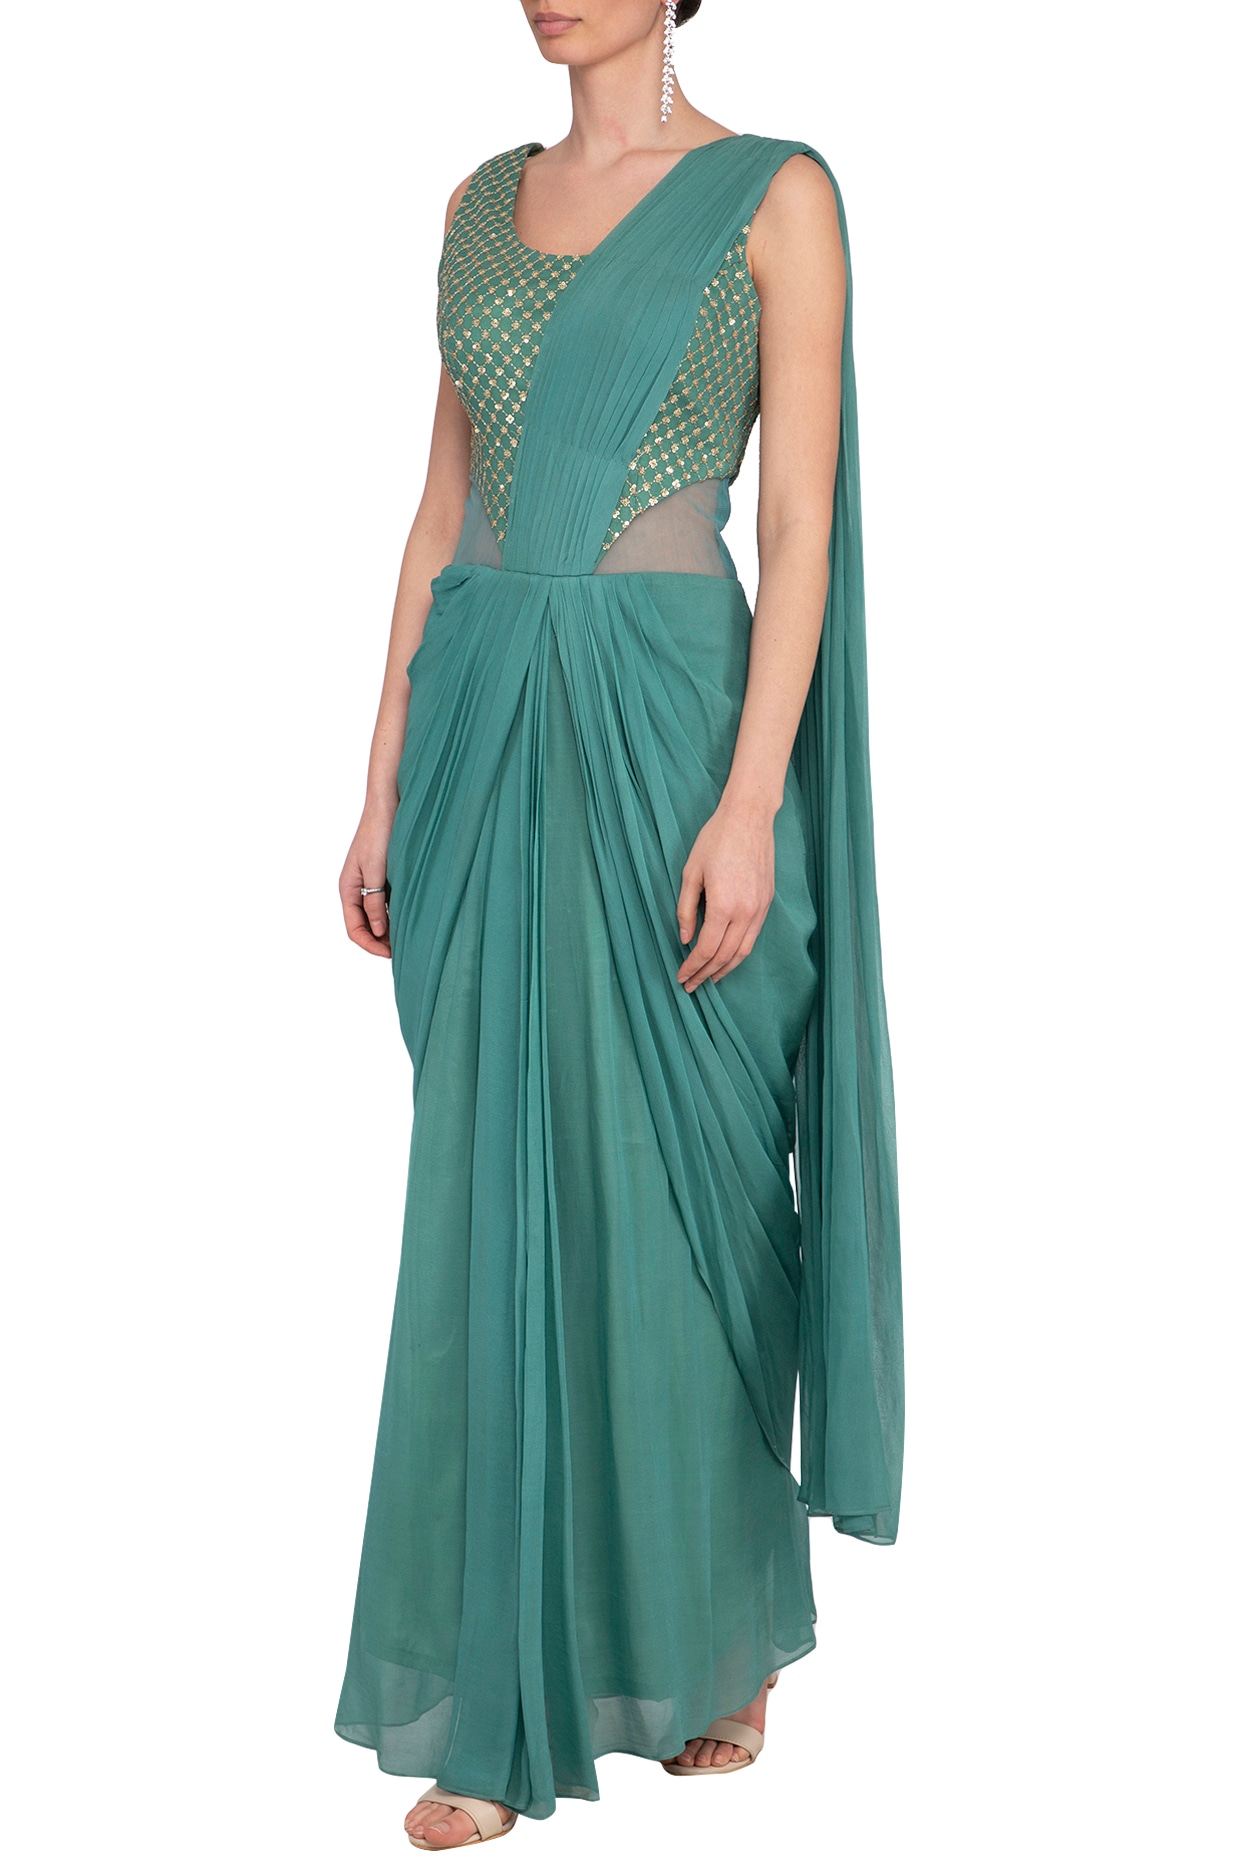 Chamakte Sitaara Gown Grey Drape Gown In Crepe Embellished With Pearls And  Tassel Embroidery.